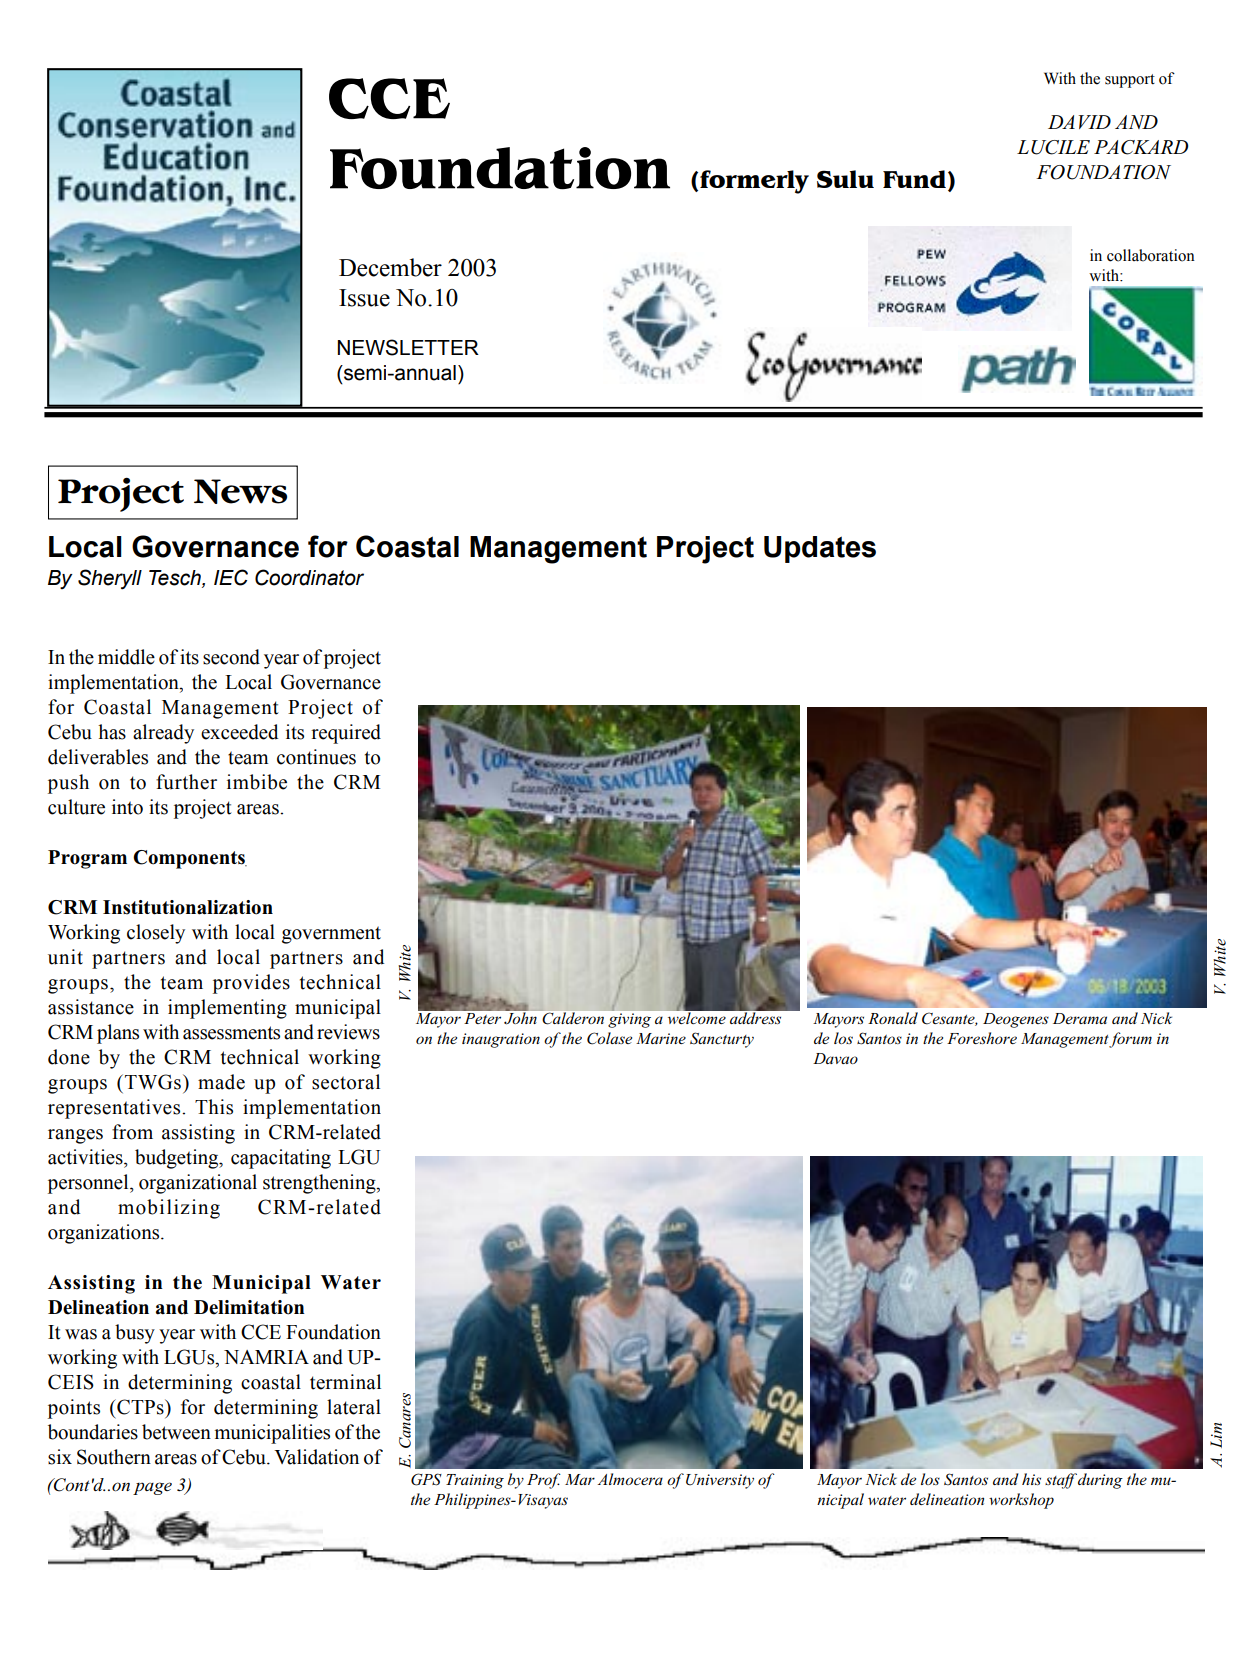 LOCAL GOVERNANCE FOR COASTAL MANAGEMENT PROJECT UPDATES